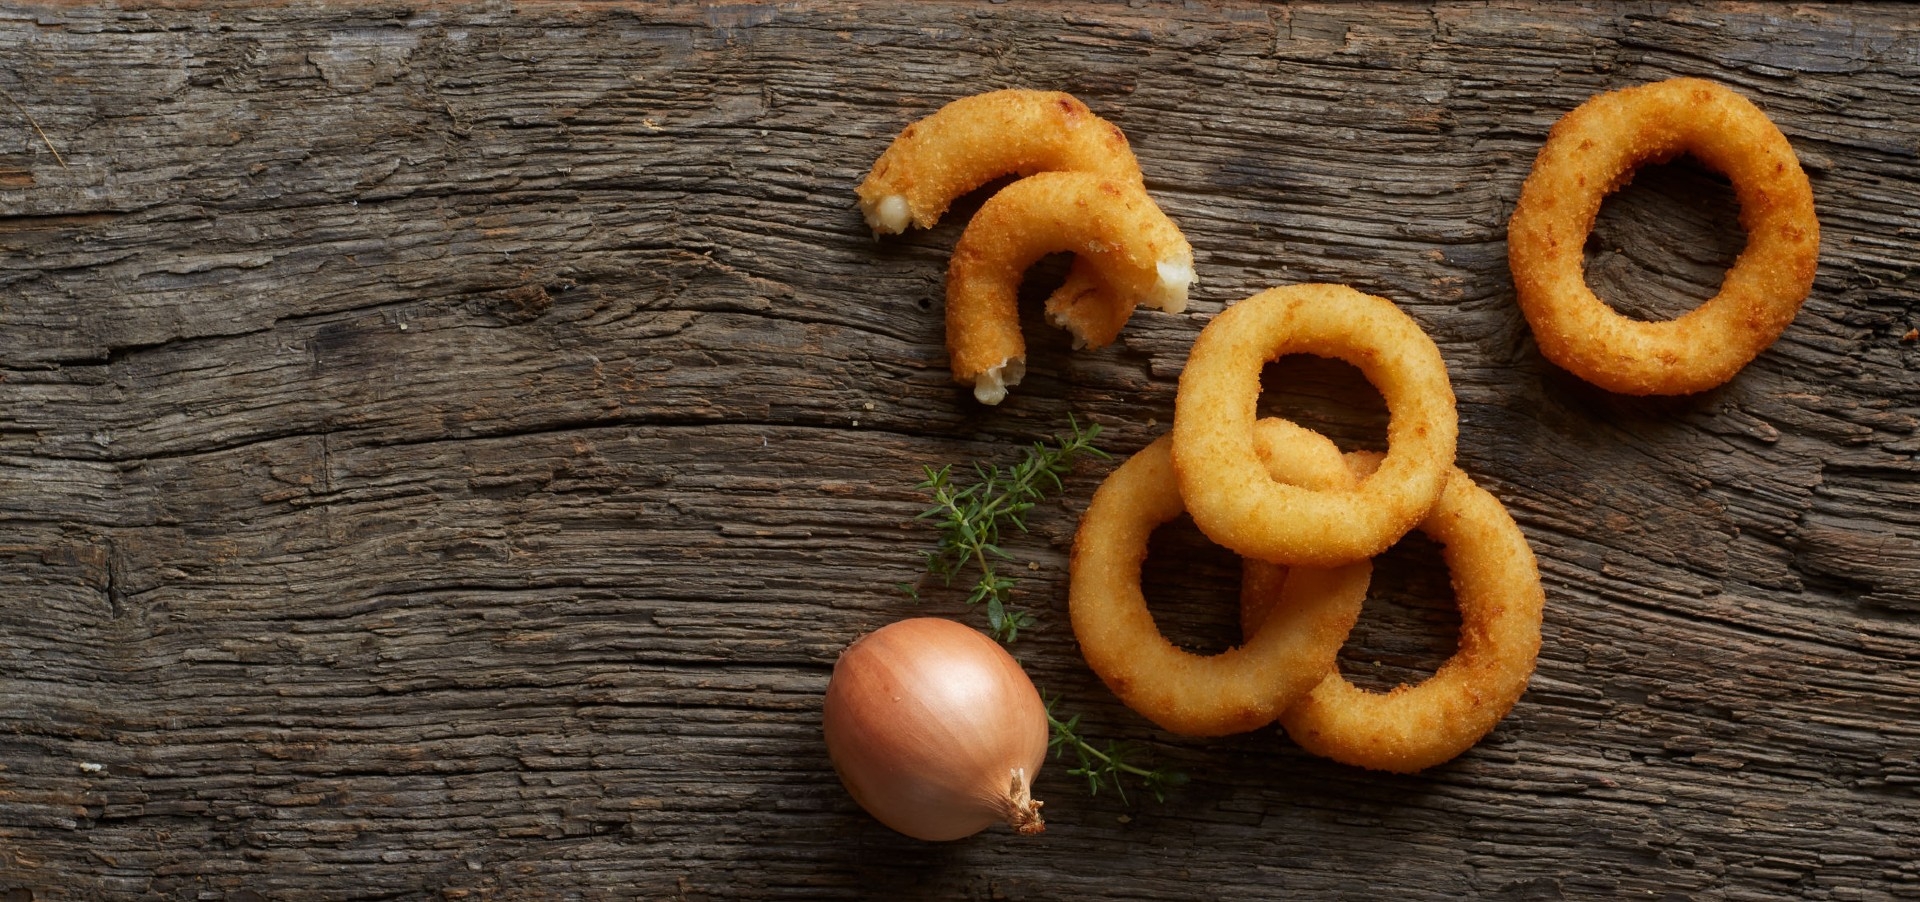 Einde Wakker worden Ounce Battered Onion Rings. Aviko's range of appetizers such as these battered  onion rings are versatile and great-tasting| Aviko Foodservice